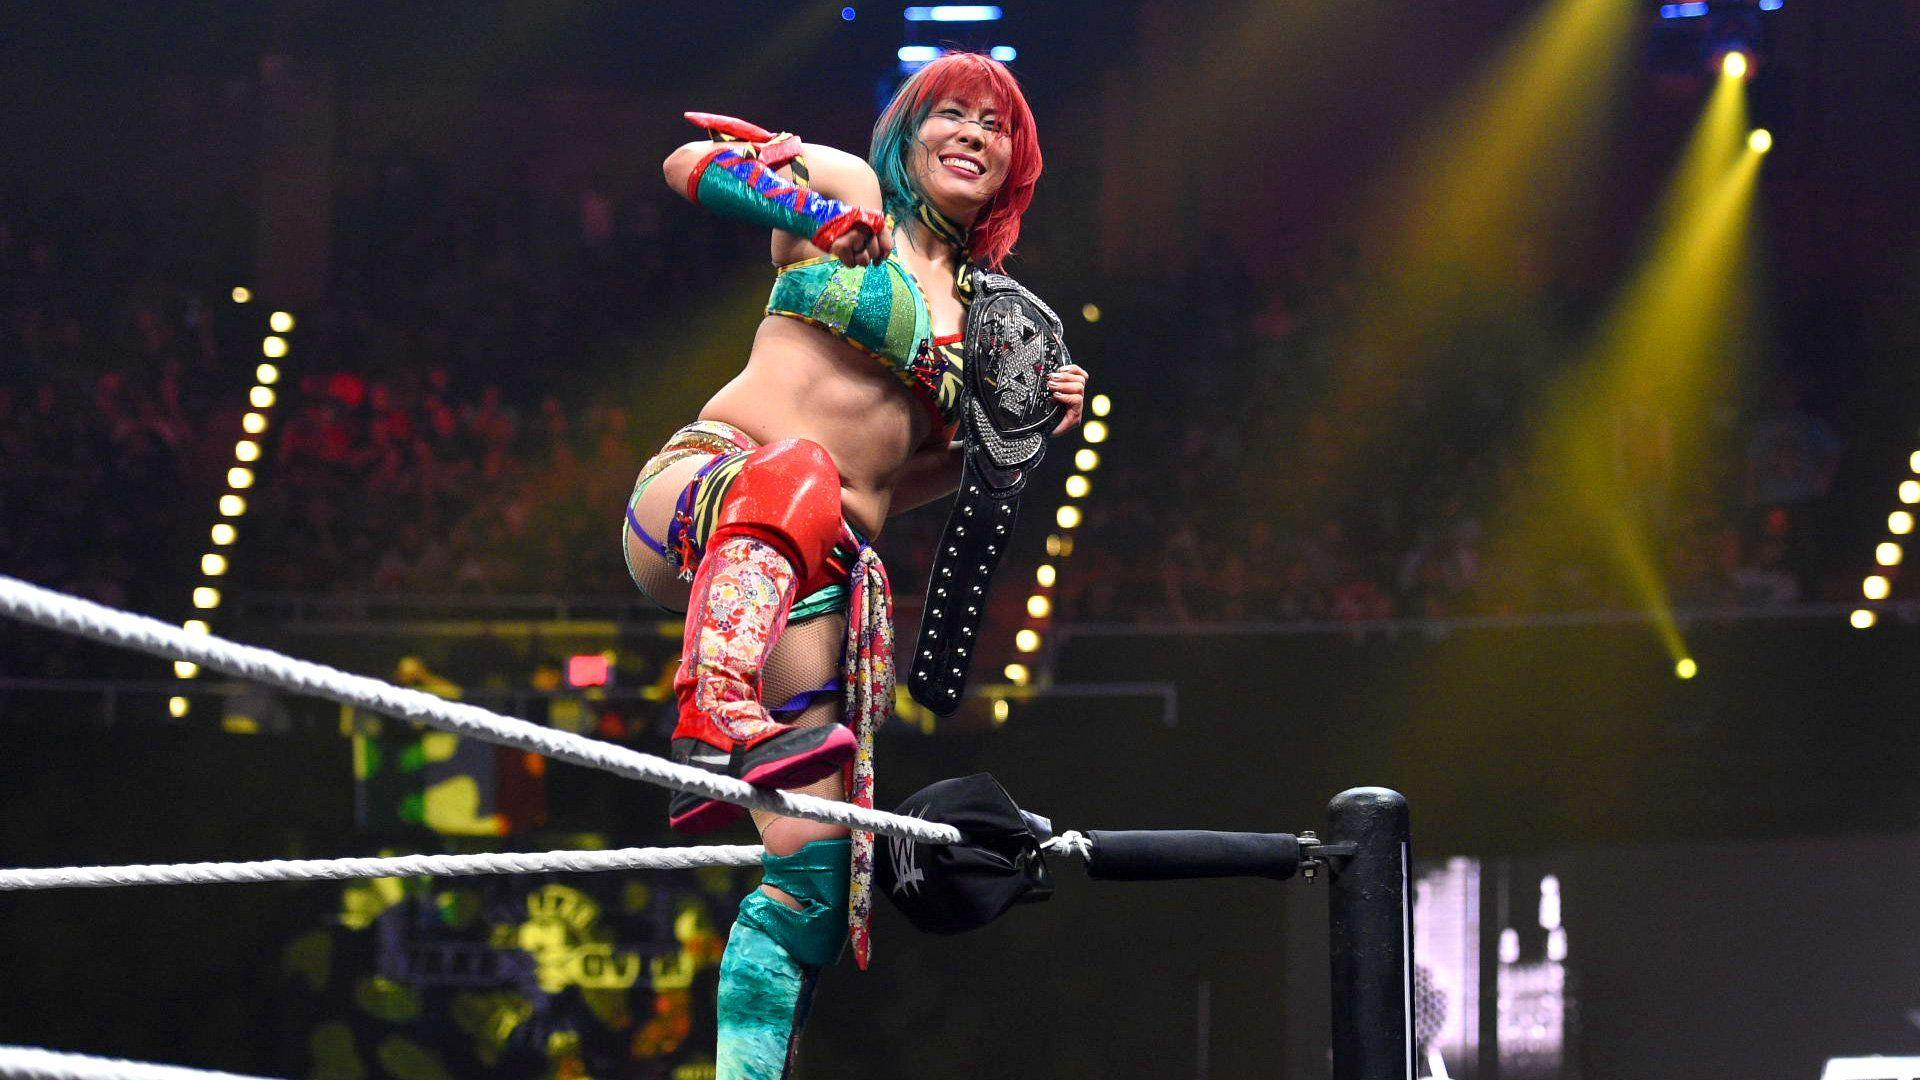 Asuka Will Be A Part Of The WWE Raw Brand When She Returns